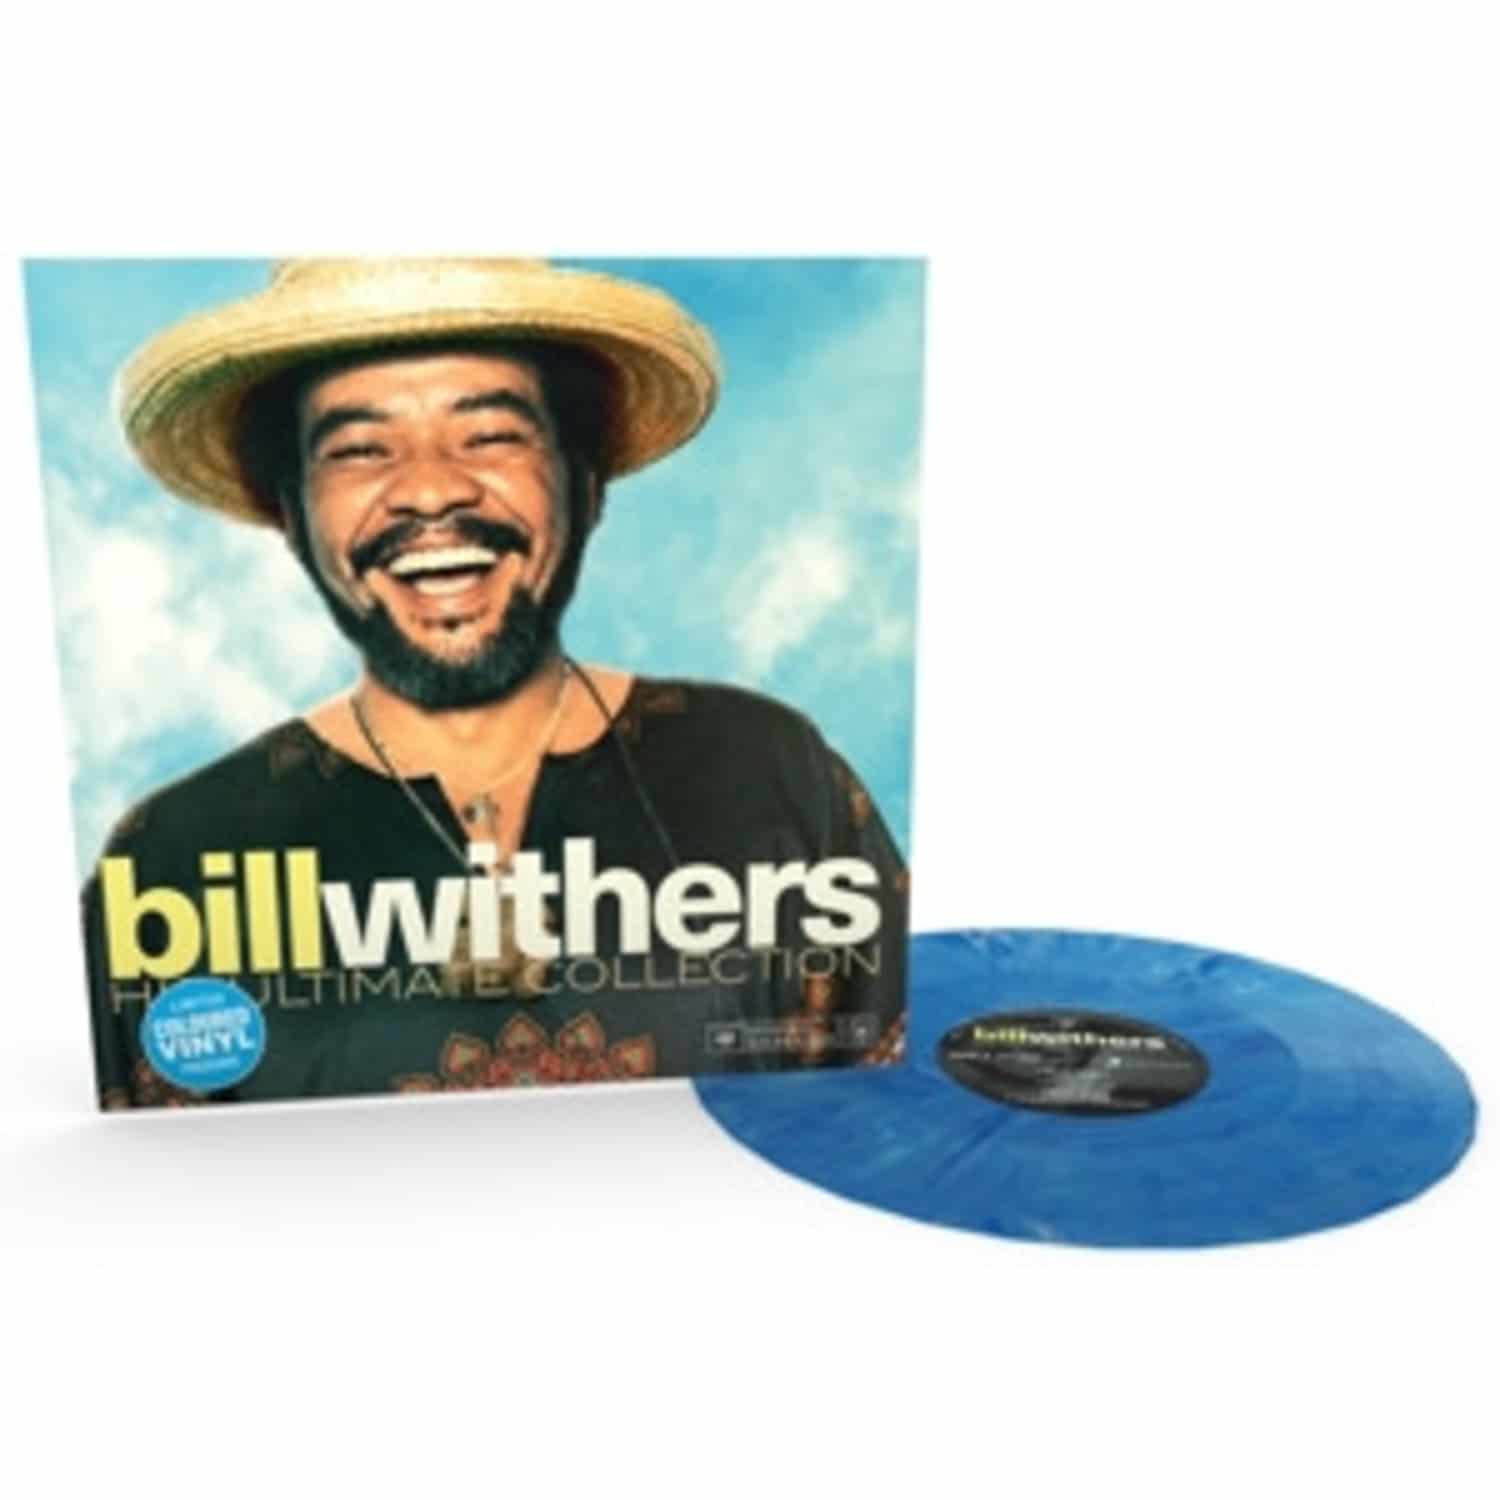 Bill Withers - HIS ULTIMATE COLLECTION 